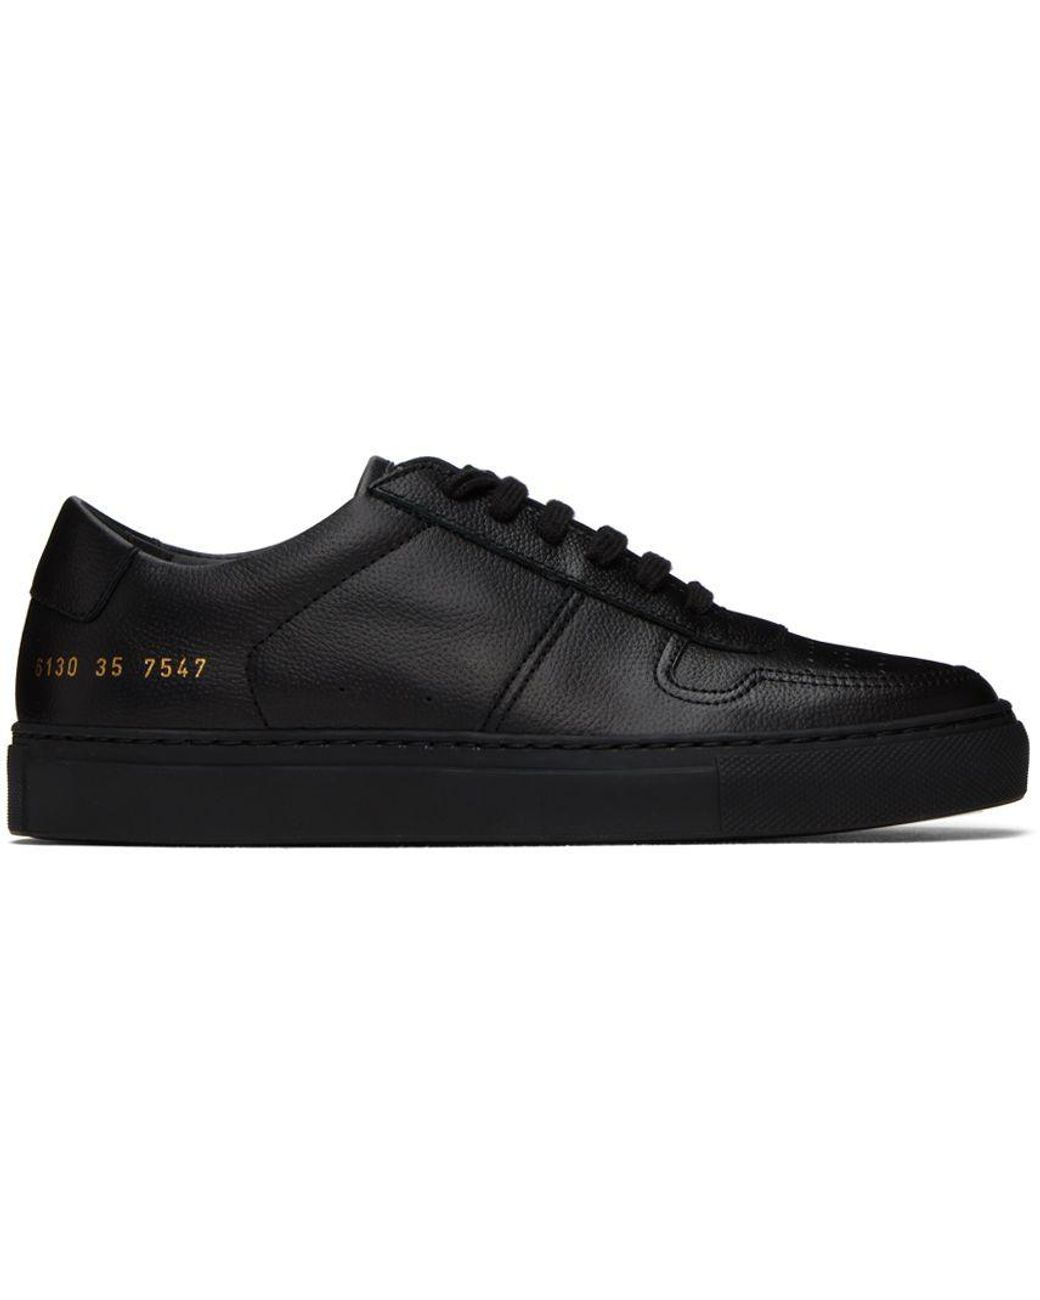 Common Projects Bball Classic Low Sneakers in Black | Lyst